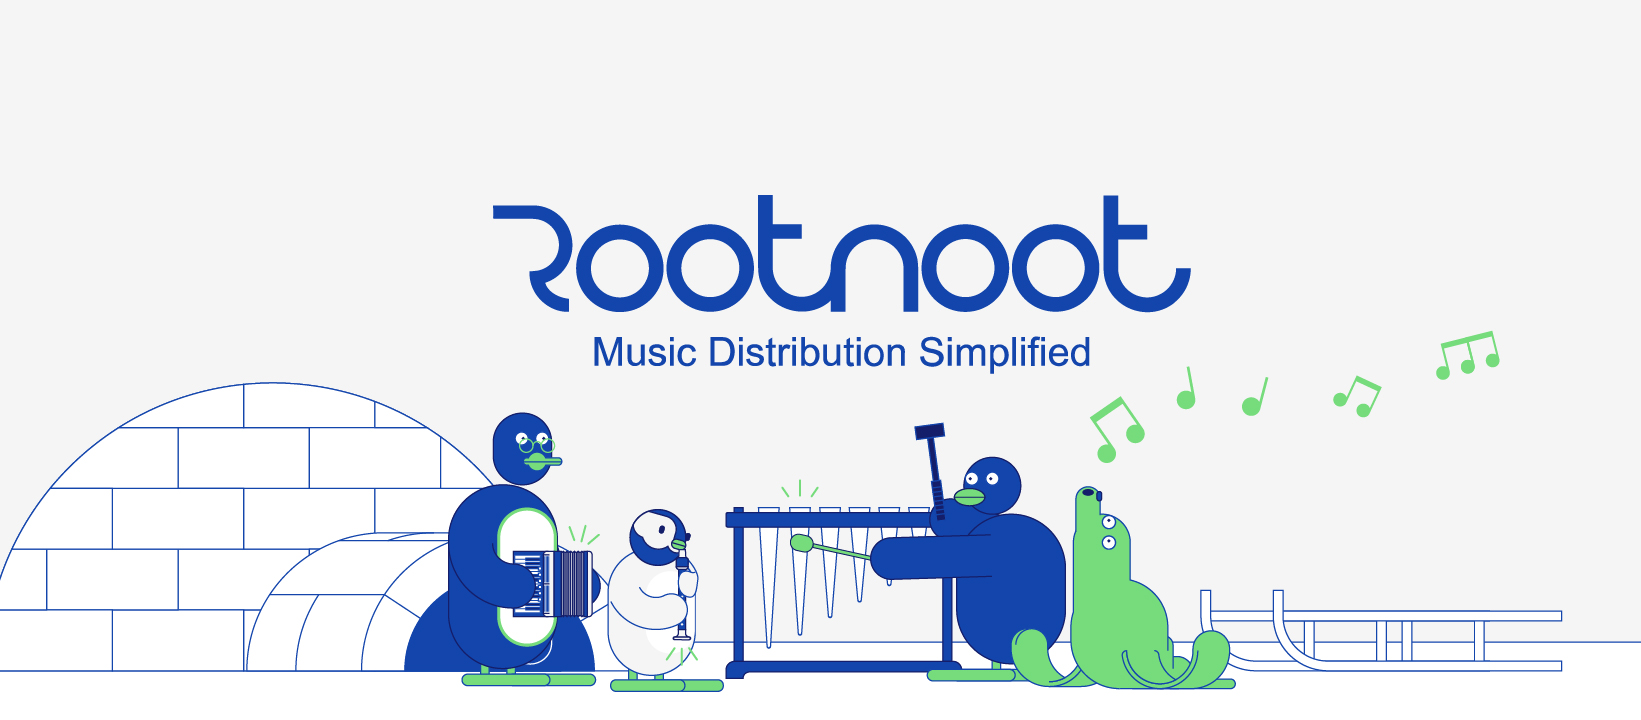 We’re changing our name to RootNoot, meet our new musical mascots